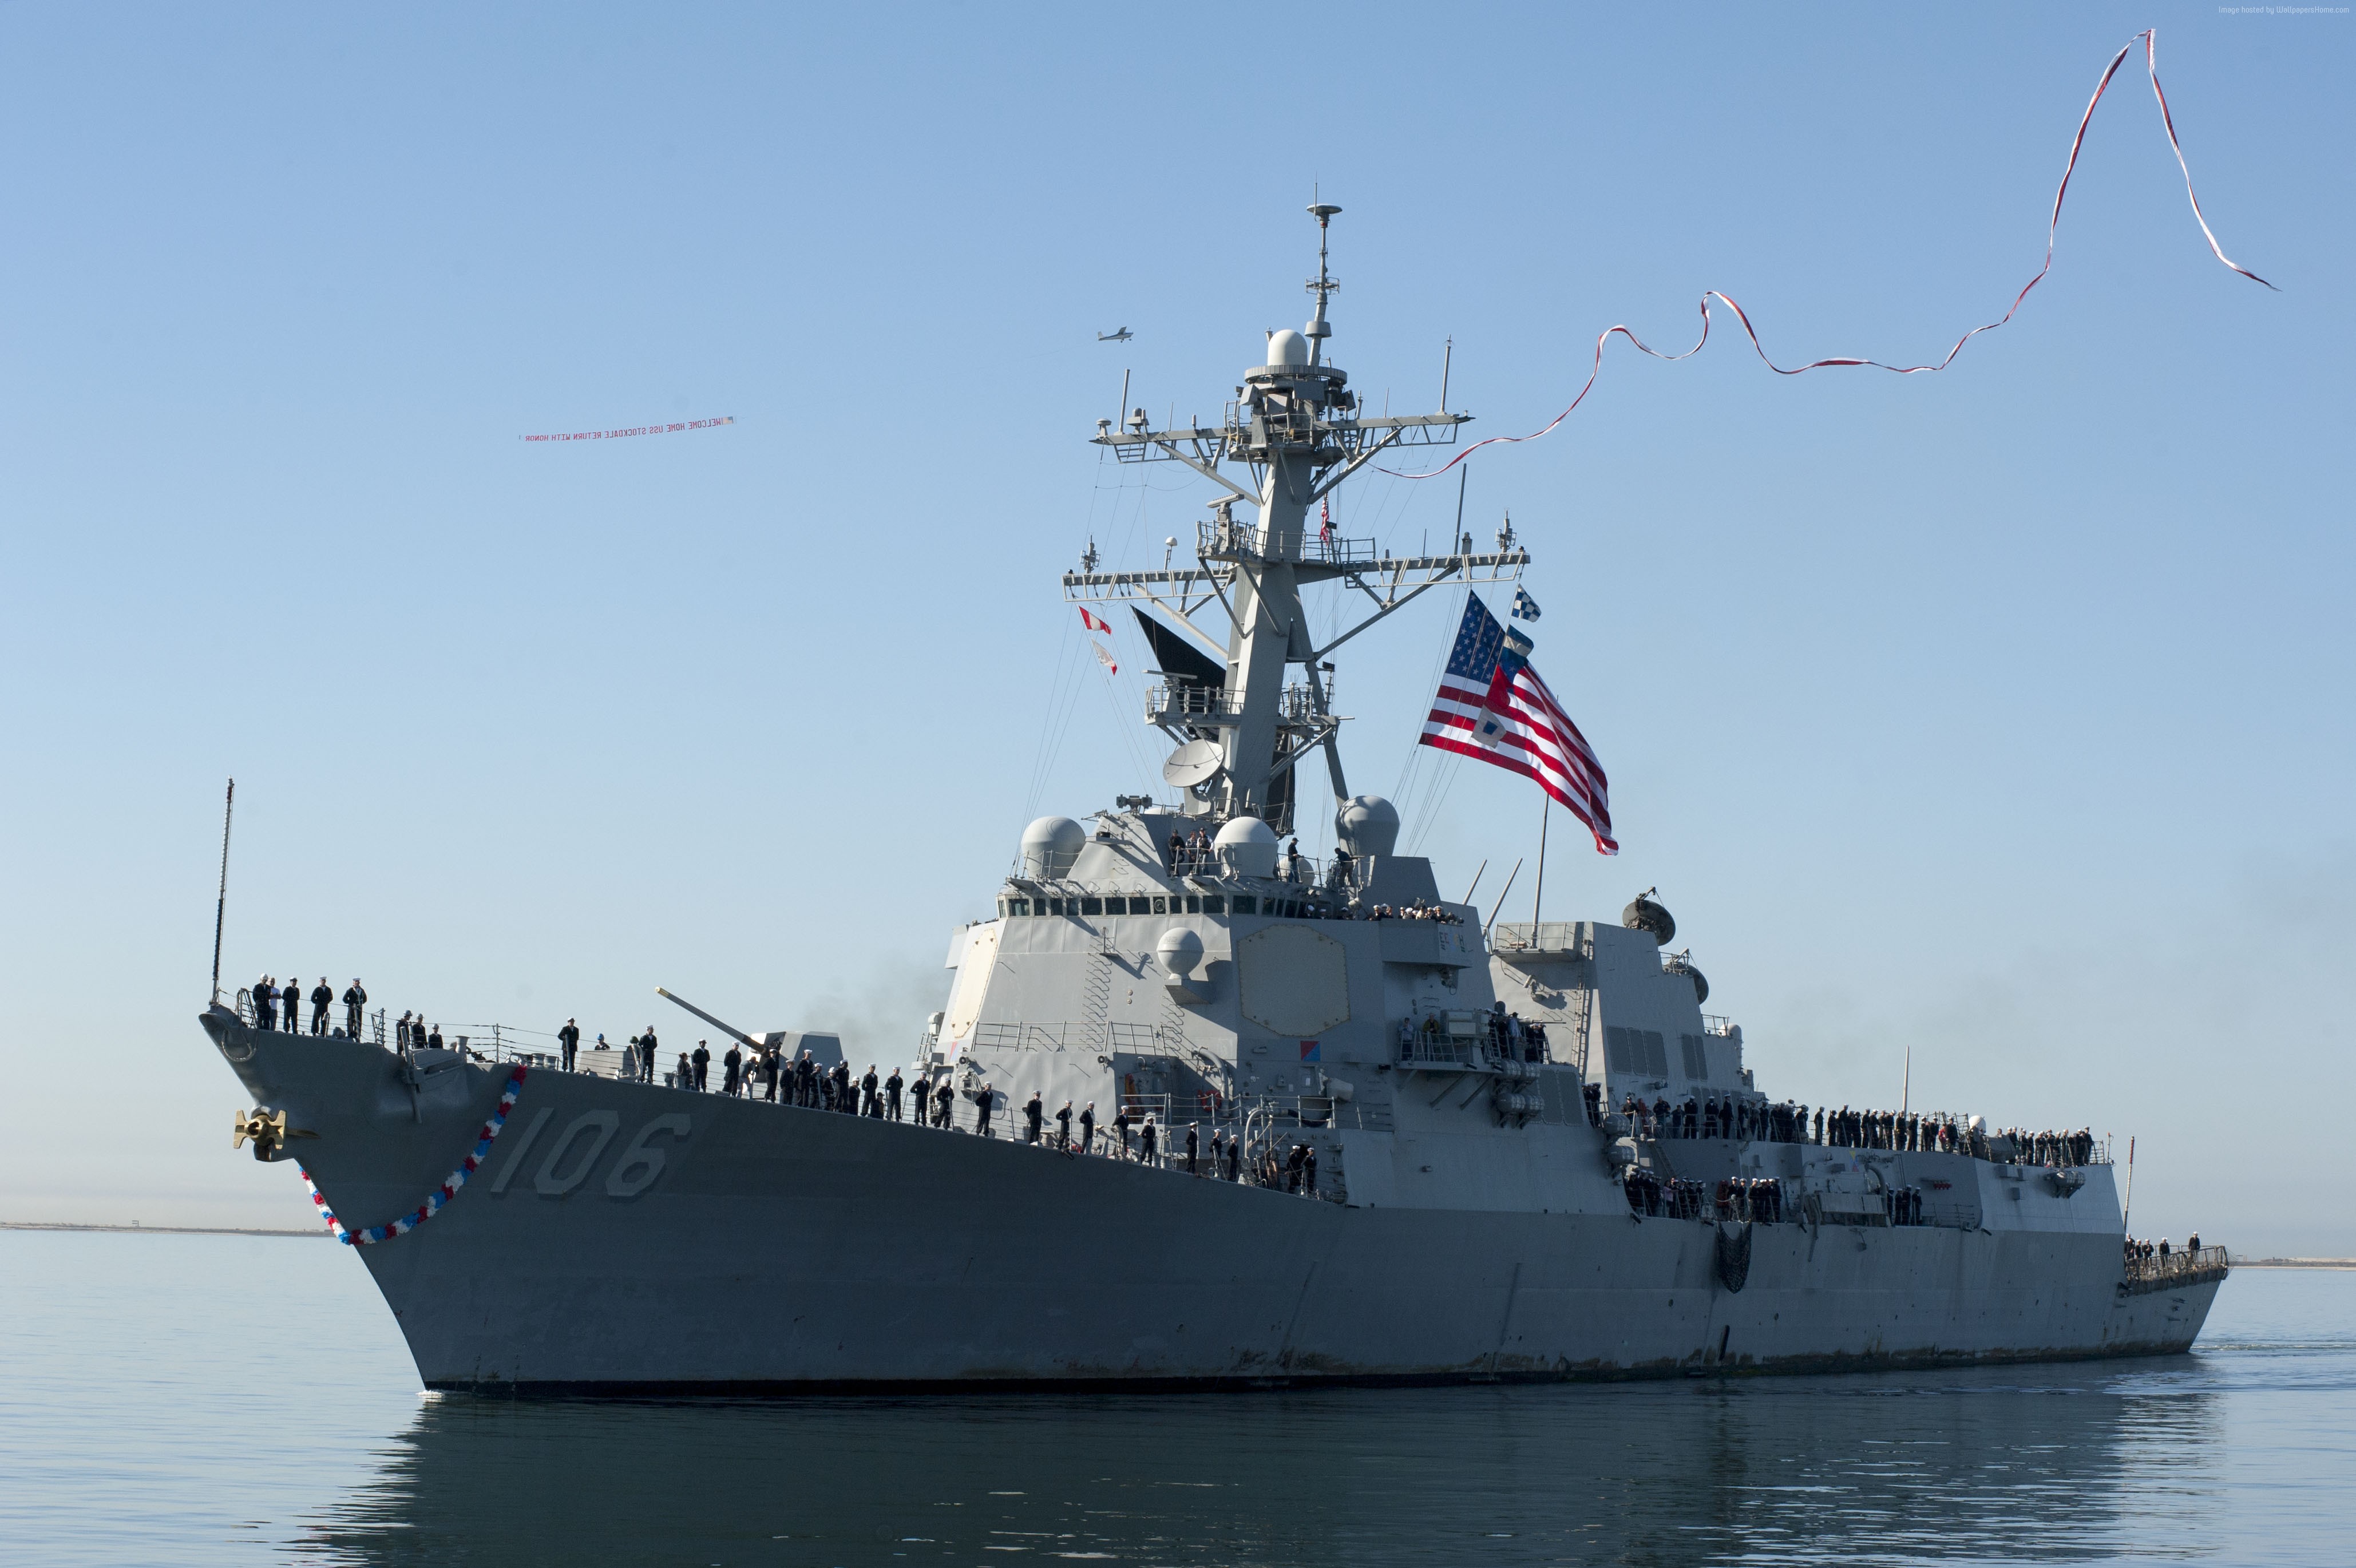 #USS Stockdale, #guided Missile Destroyer, #Arleigh Burke Class, #USA Navy, #DDG 106. Mocah HD Wallpaper